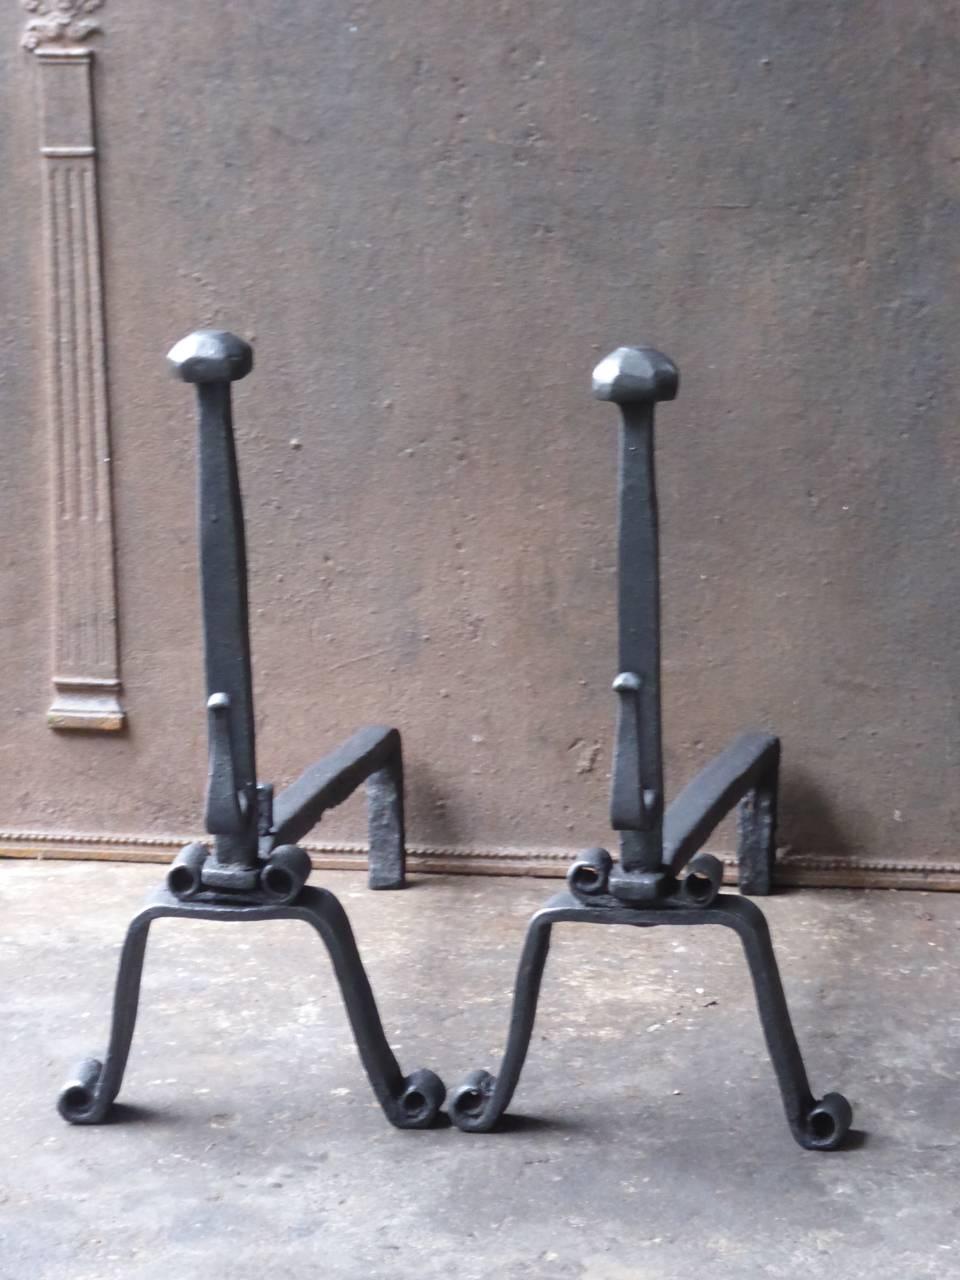 18th century French Gothic fire dogs made of wrought iron.

We have a unique and specialized collection of antique and used fireplace accessories consisting of more than 1000 listings at 1stdibs. Amongst others, we always have 300+ firebacks, 250+